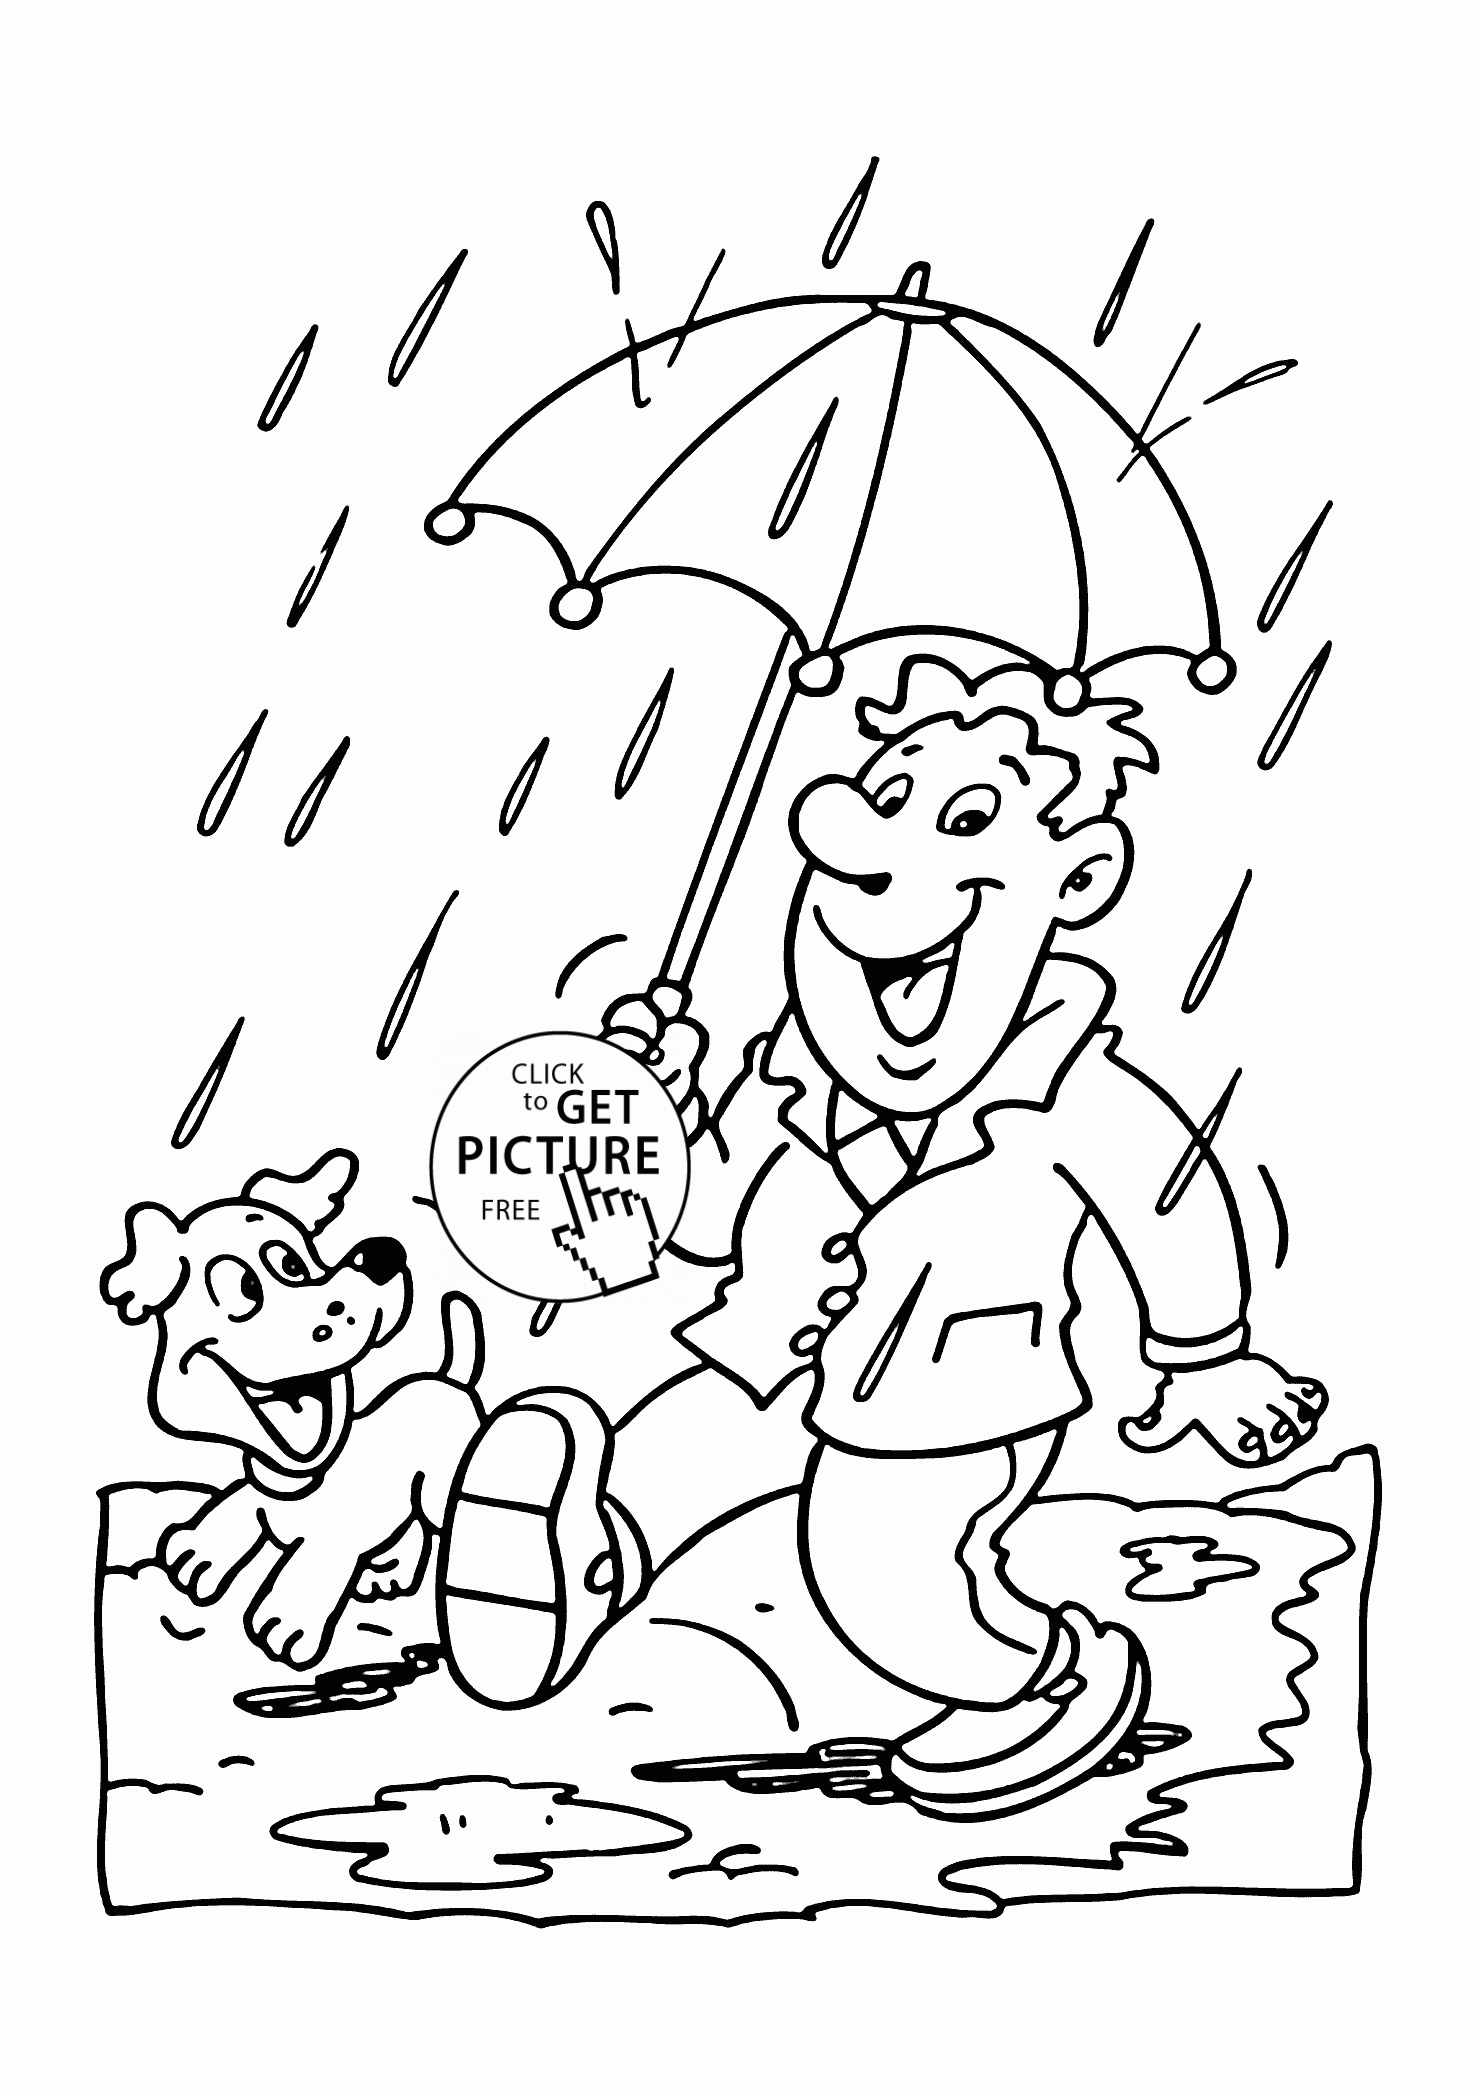 Coloring Pages Rainy Day Fantastic Photo Inspirations For ...